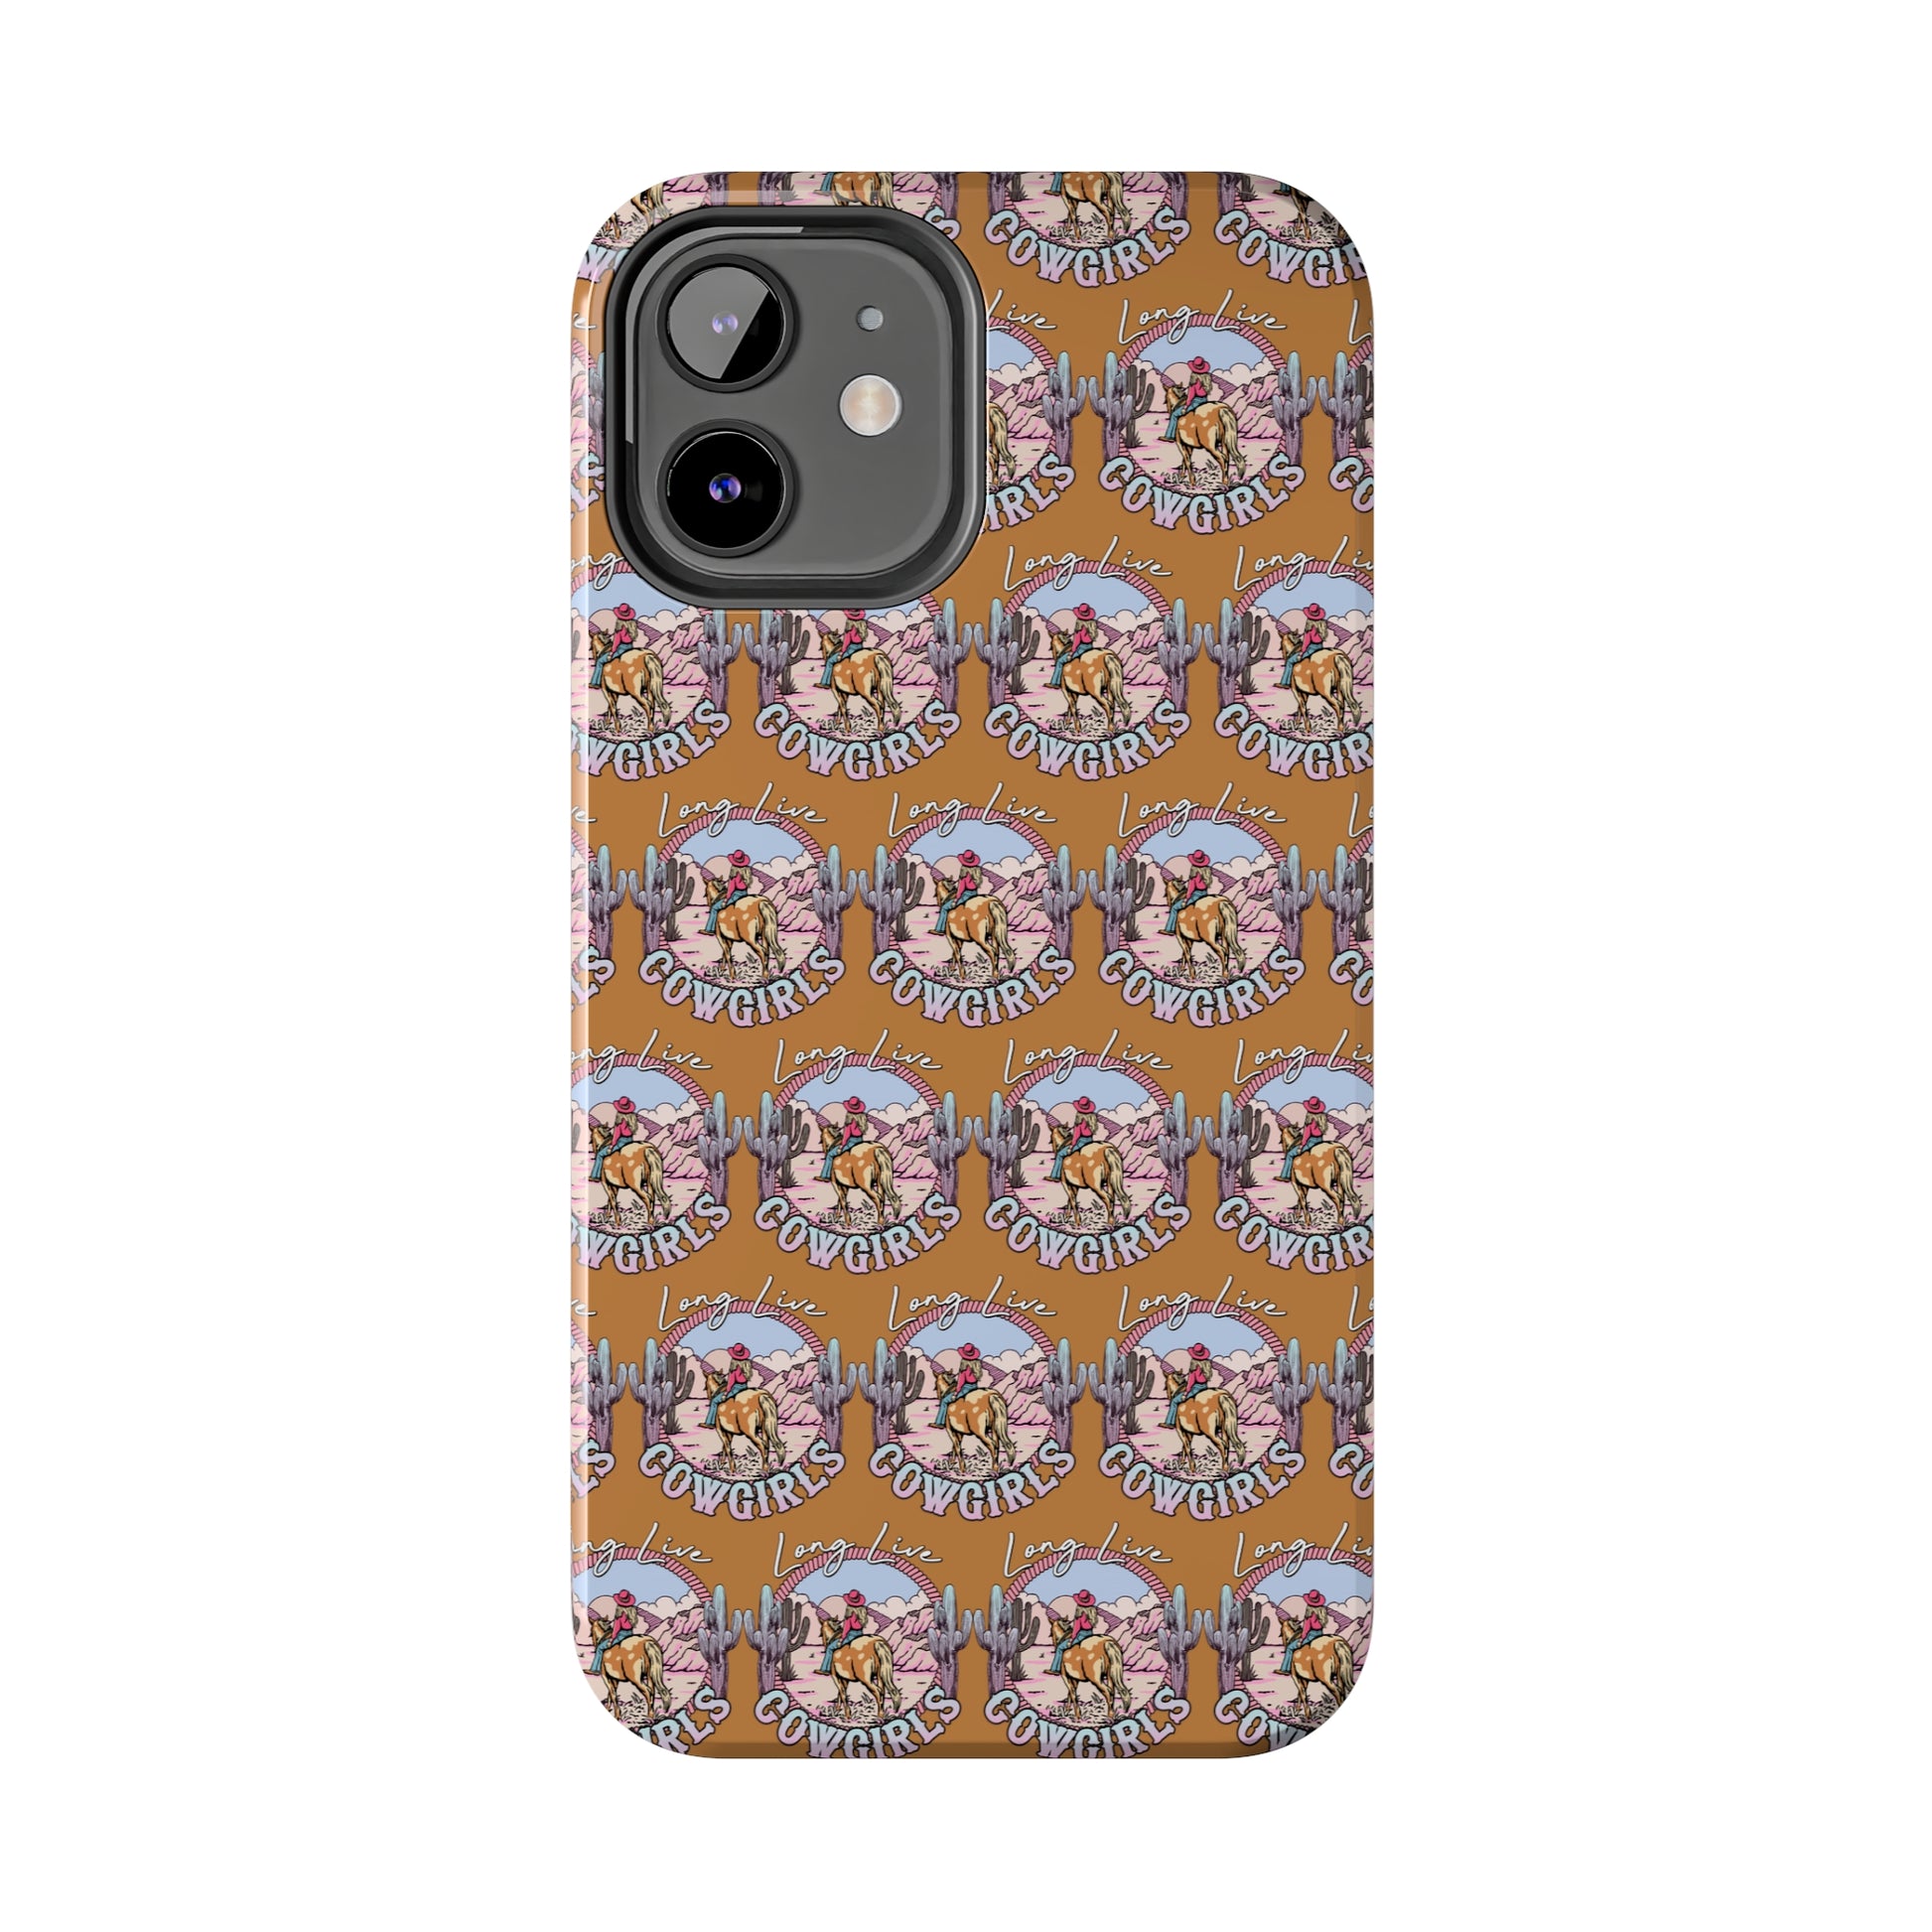 Long Live Cowgirls: iPhone Tough Case Design - Wireless Charging - Superior Protection - Original Designs by TheGlassyLass.com